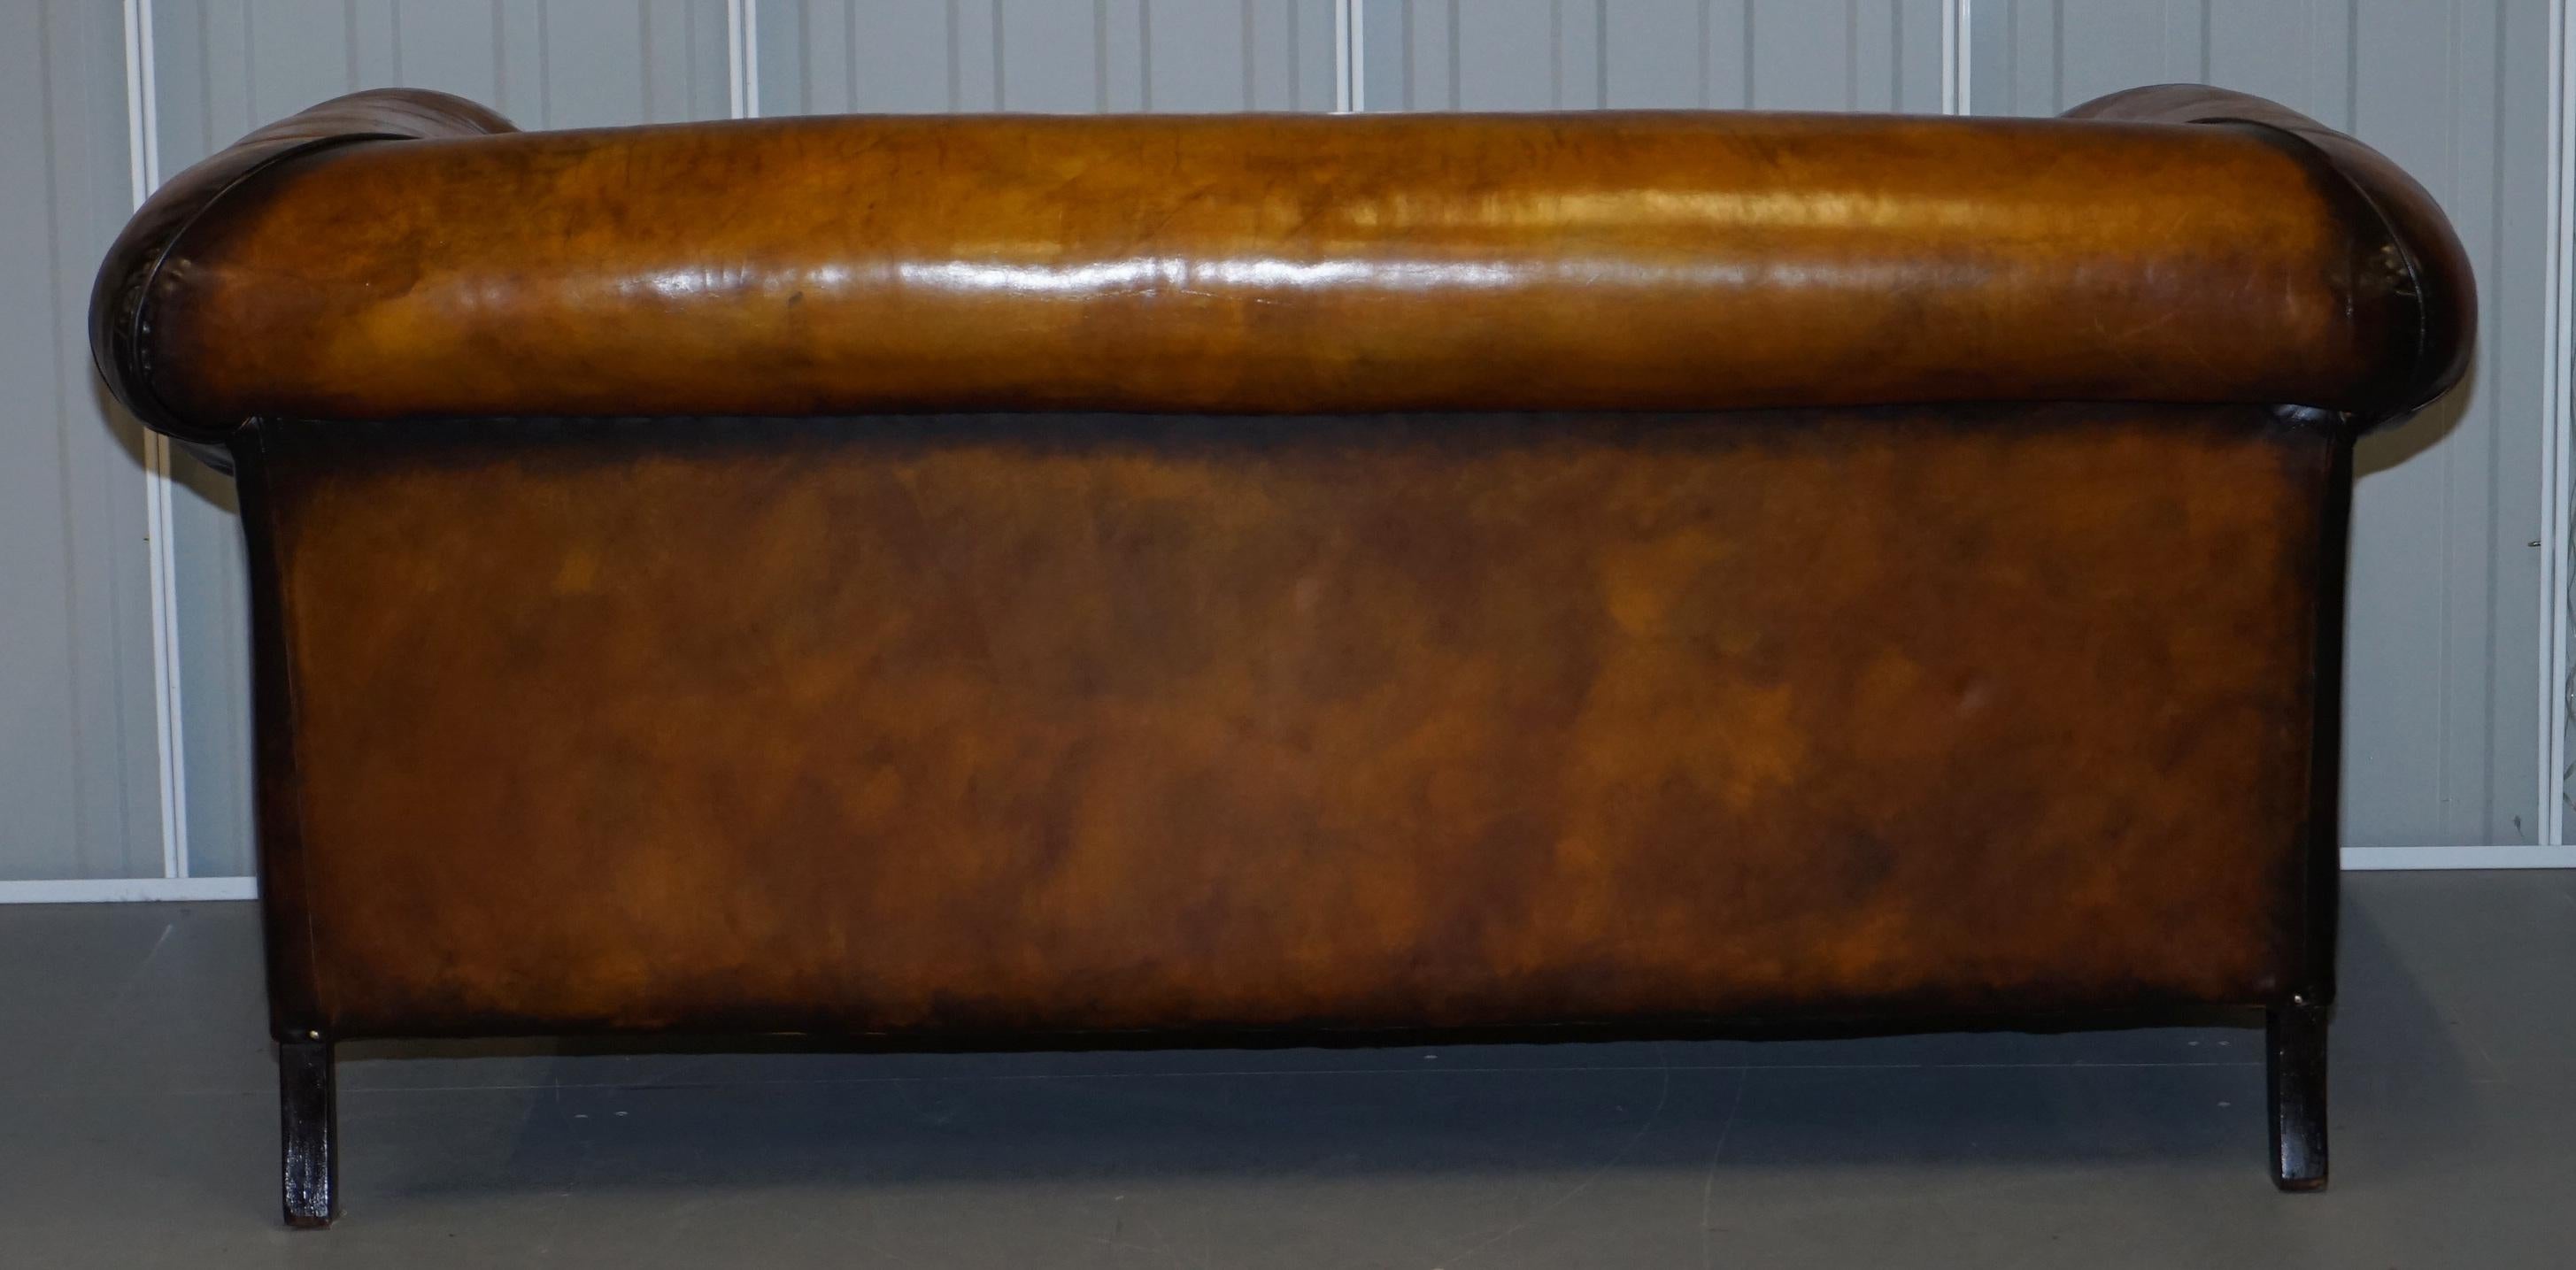 1 of 2 Restored Victorian Club Chesterfield Hand Dyed Leather Sofas Kilim Seat For Sale 10